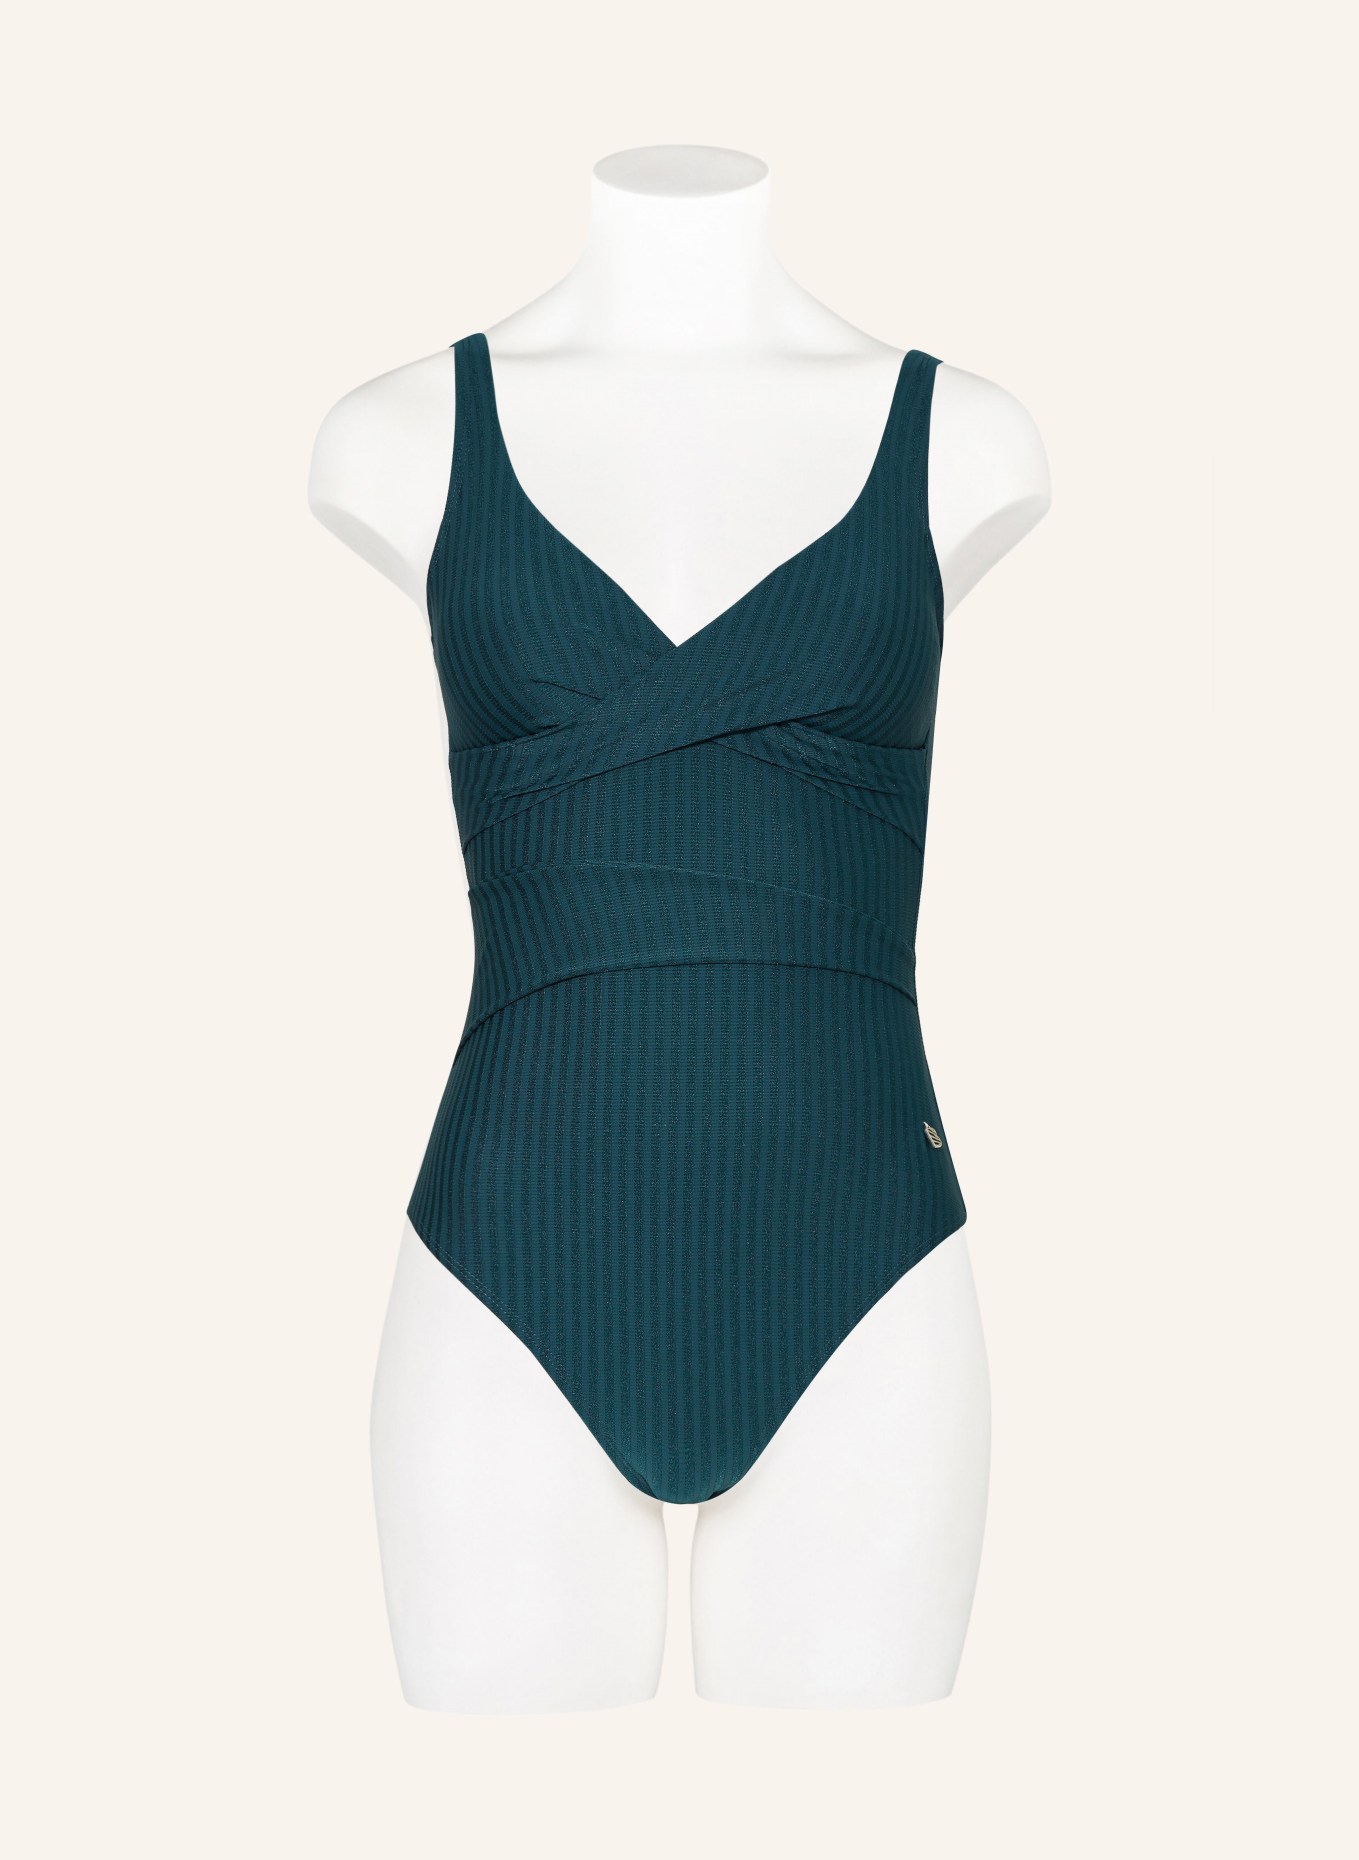 BEACHLIFE Swimsuit REFLECTING POND, Color: TEAL (Image 2)